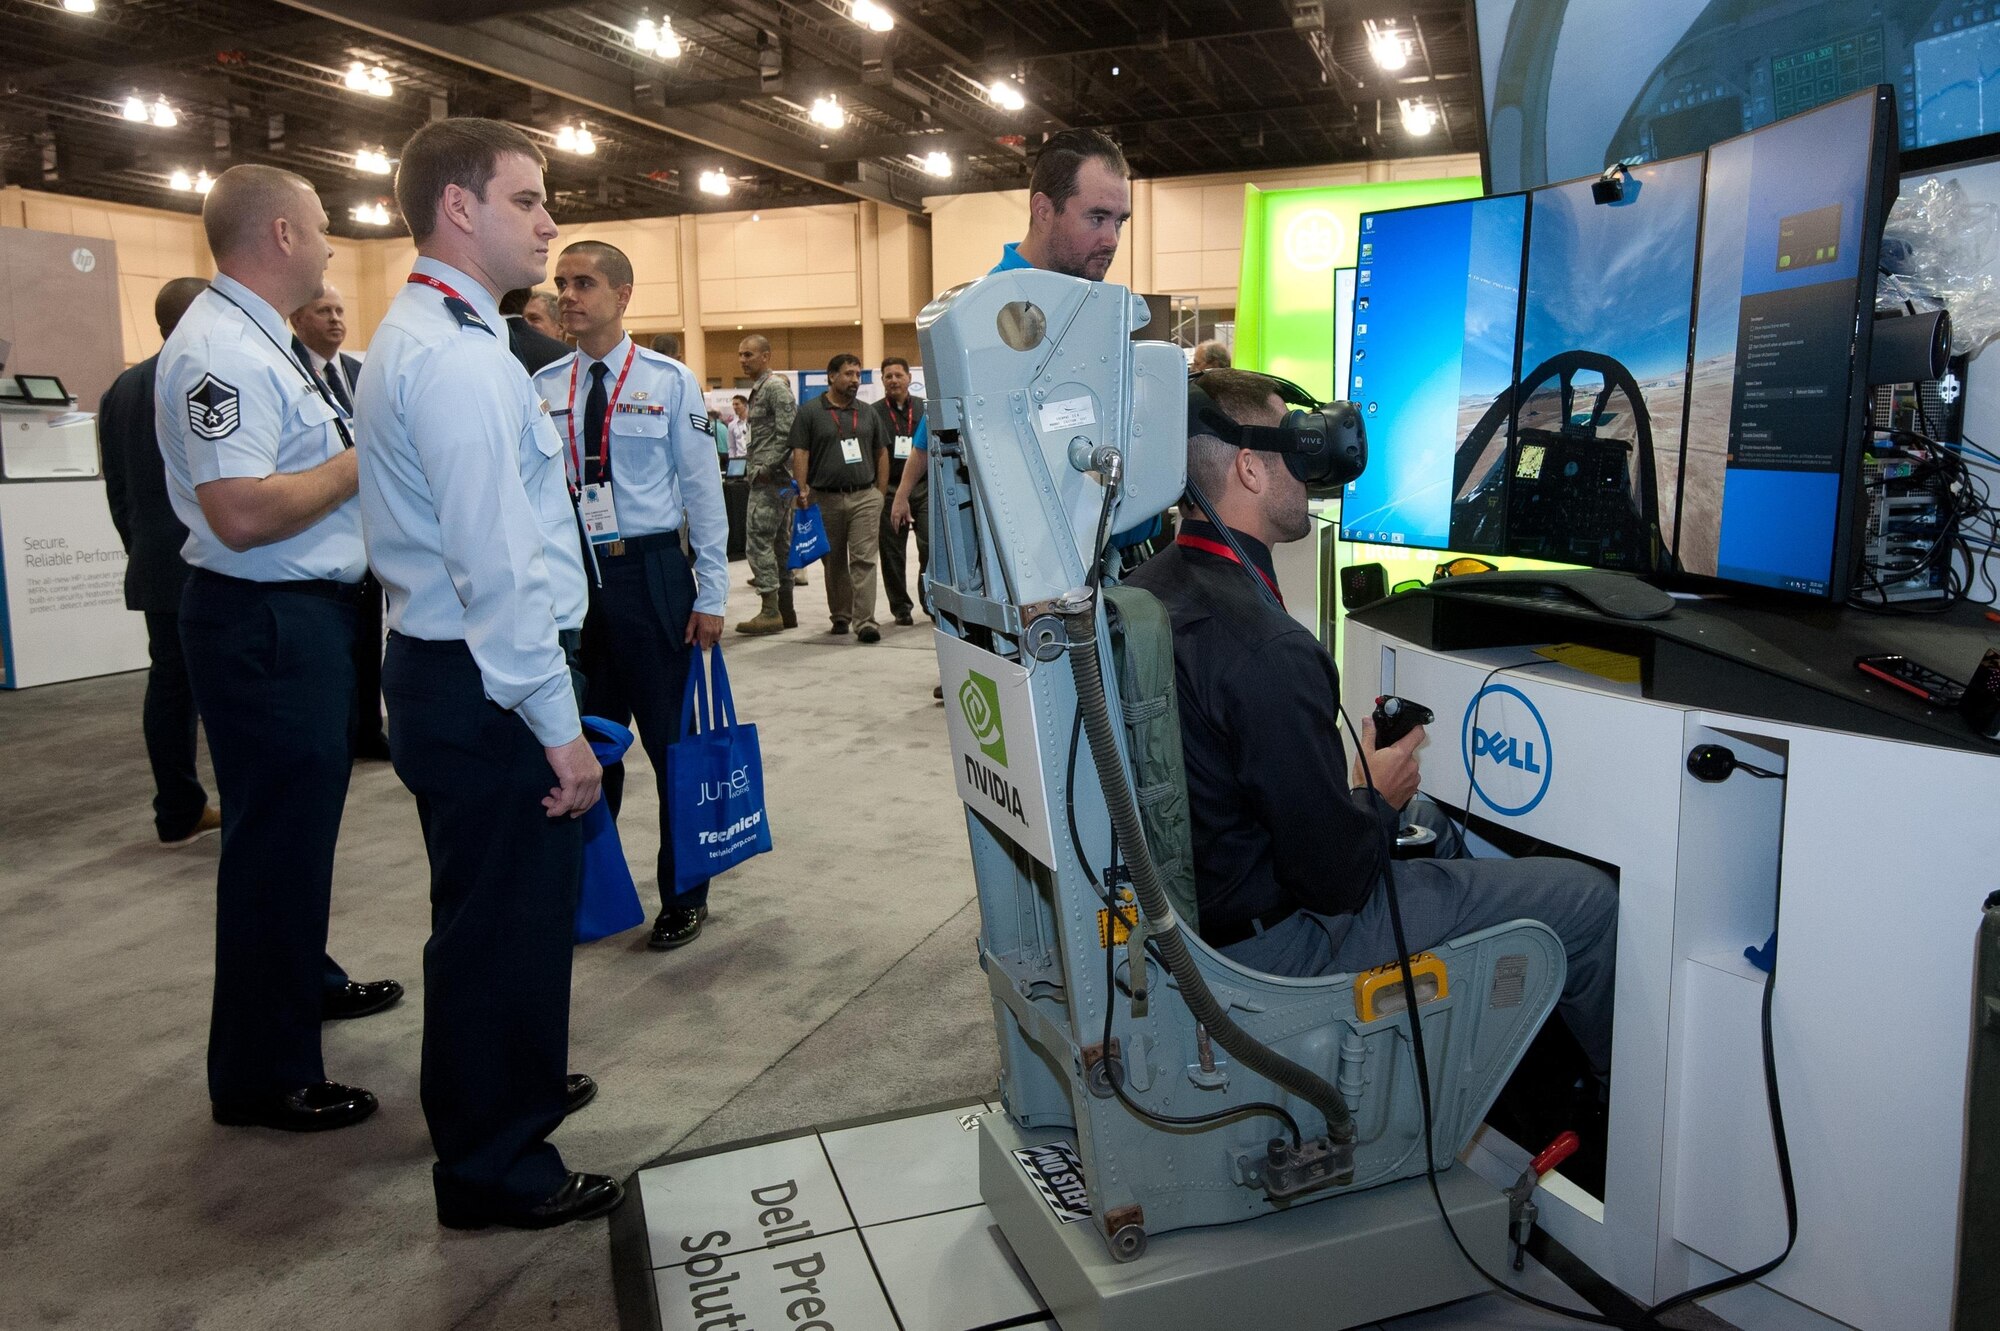 The 2016 Air Force Information Technology and Cyberpower Conference drew more than 100 cyber and IT vendors and more than 3,200 attendees. Conference organizers expect more vendors and guests to attend this year’s conference. (U.S. Air Force photo/Melanie Cox)